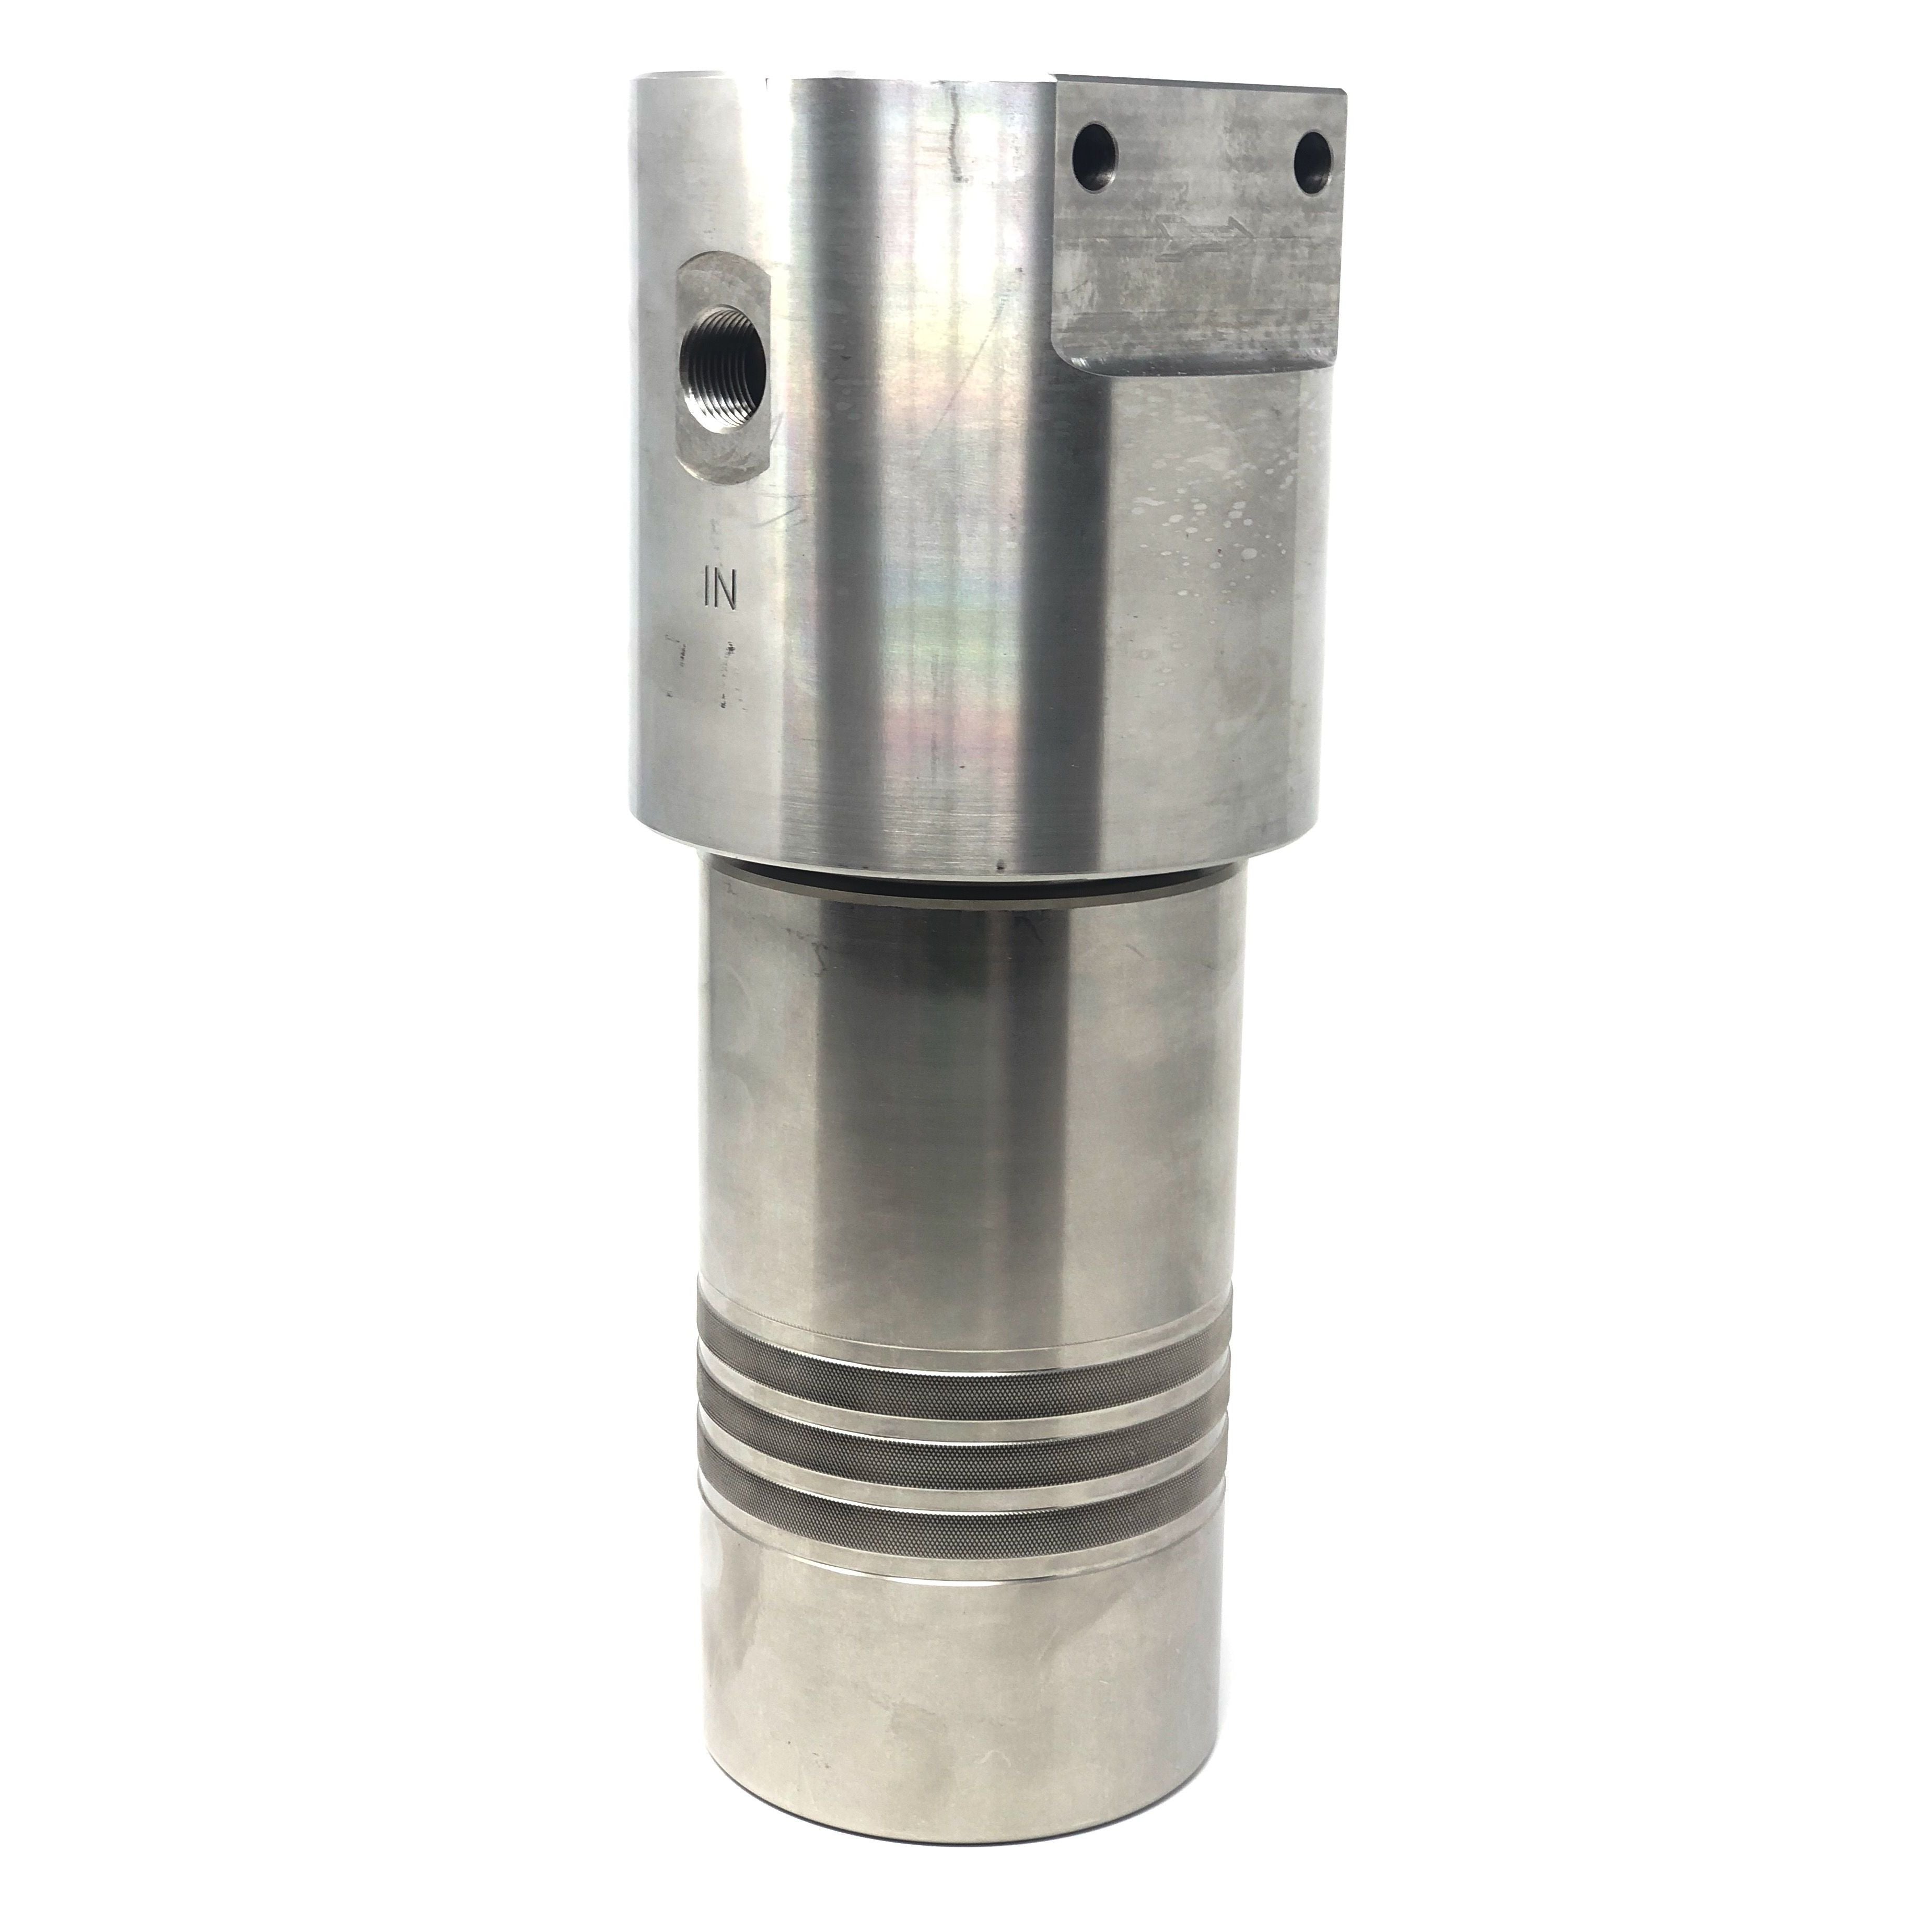 52S-2412N-10SEN : Chase Ultra High Pressure Inline Filter, 10000psi, 3/4" NPT, 10 Micron, With Visual Indicator, No Bypass